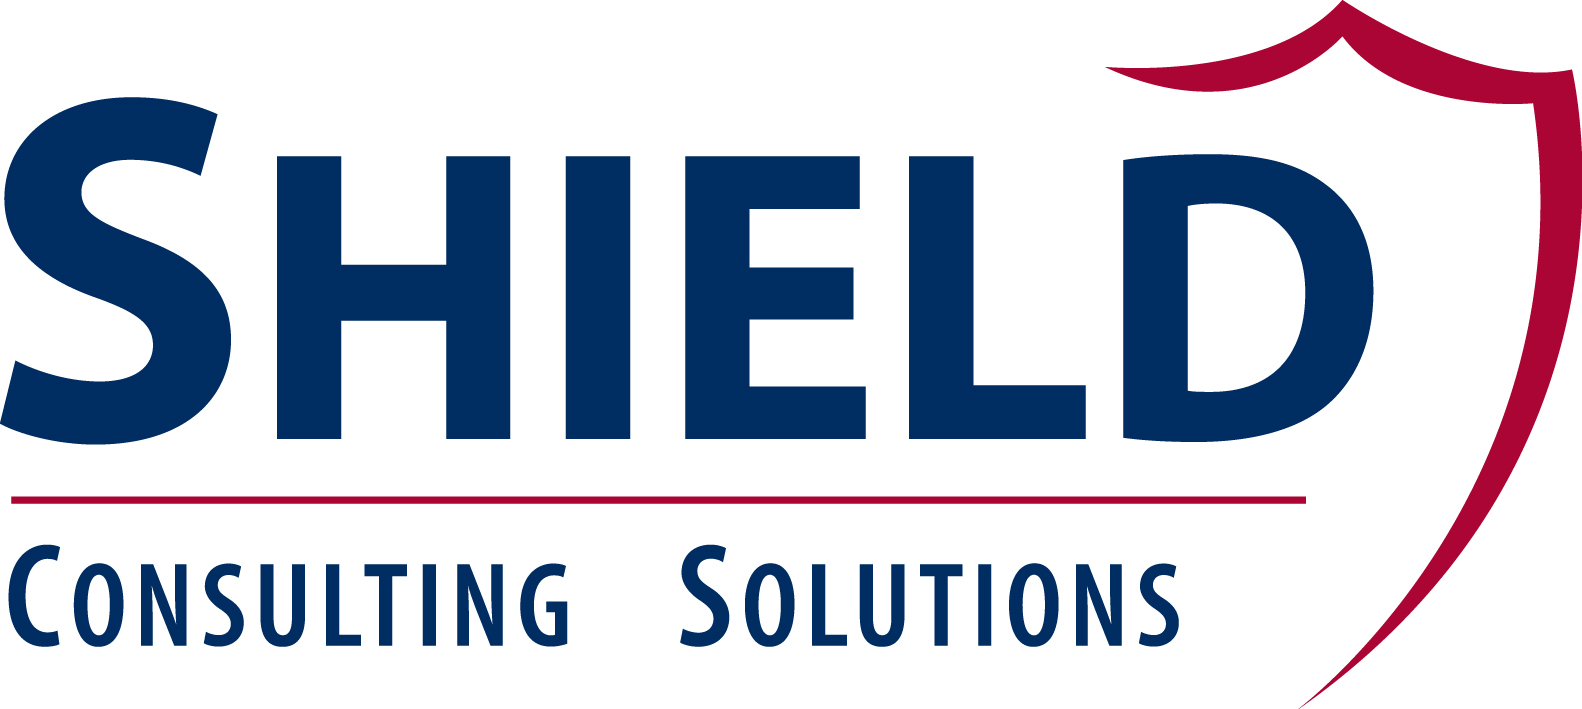 Shield Consulting Solutions Company Logo